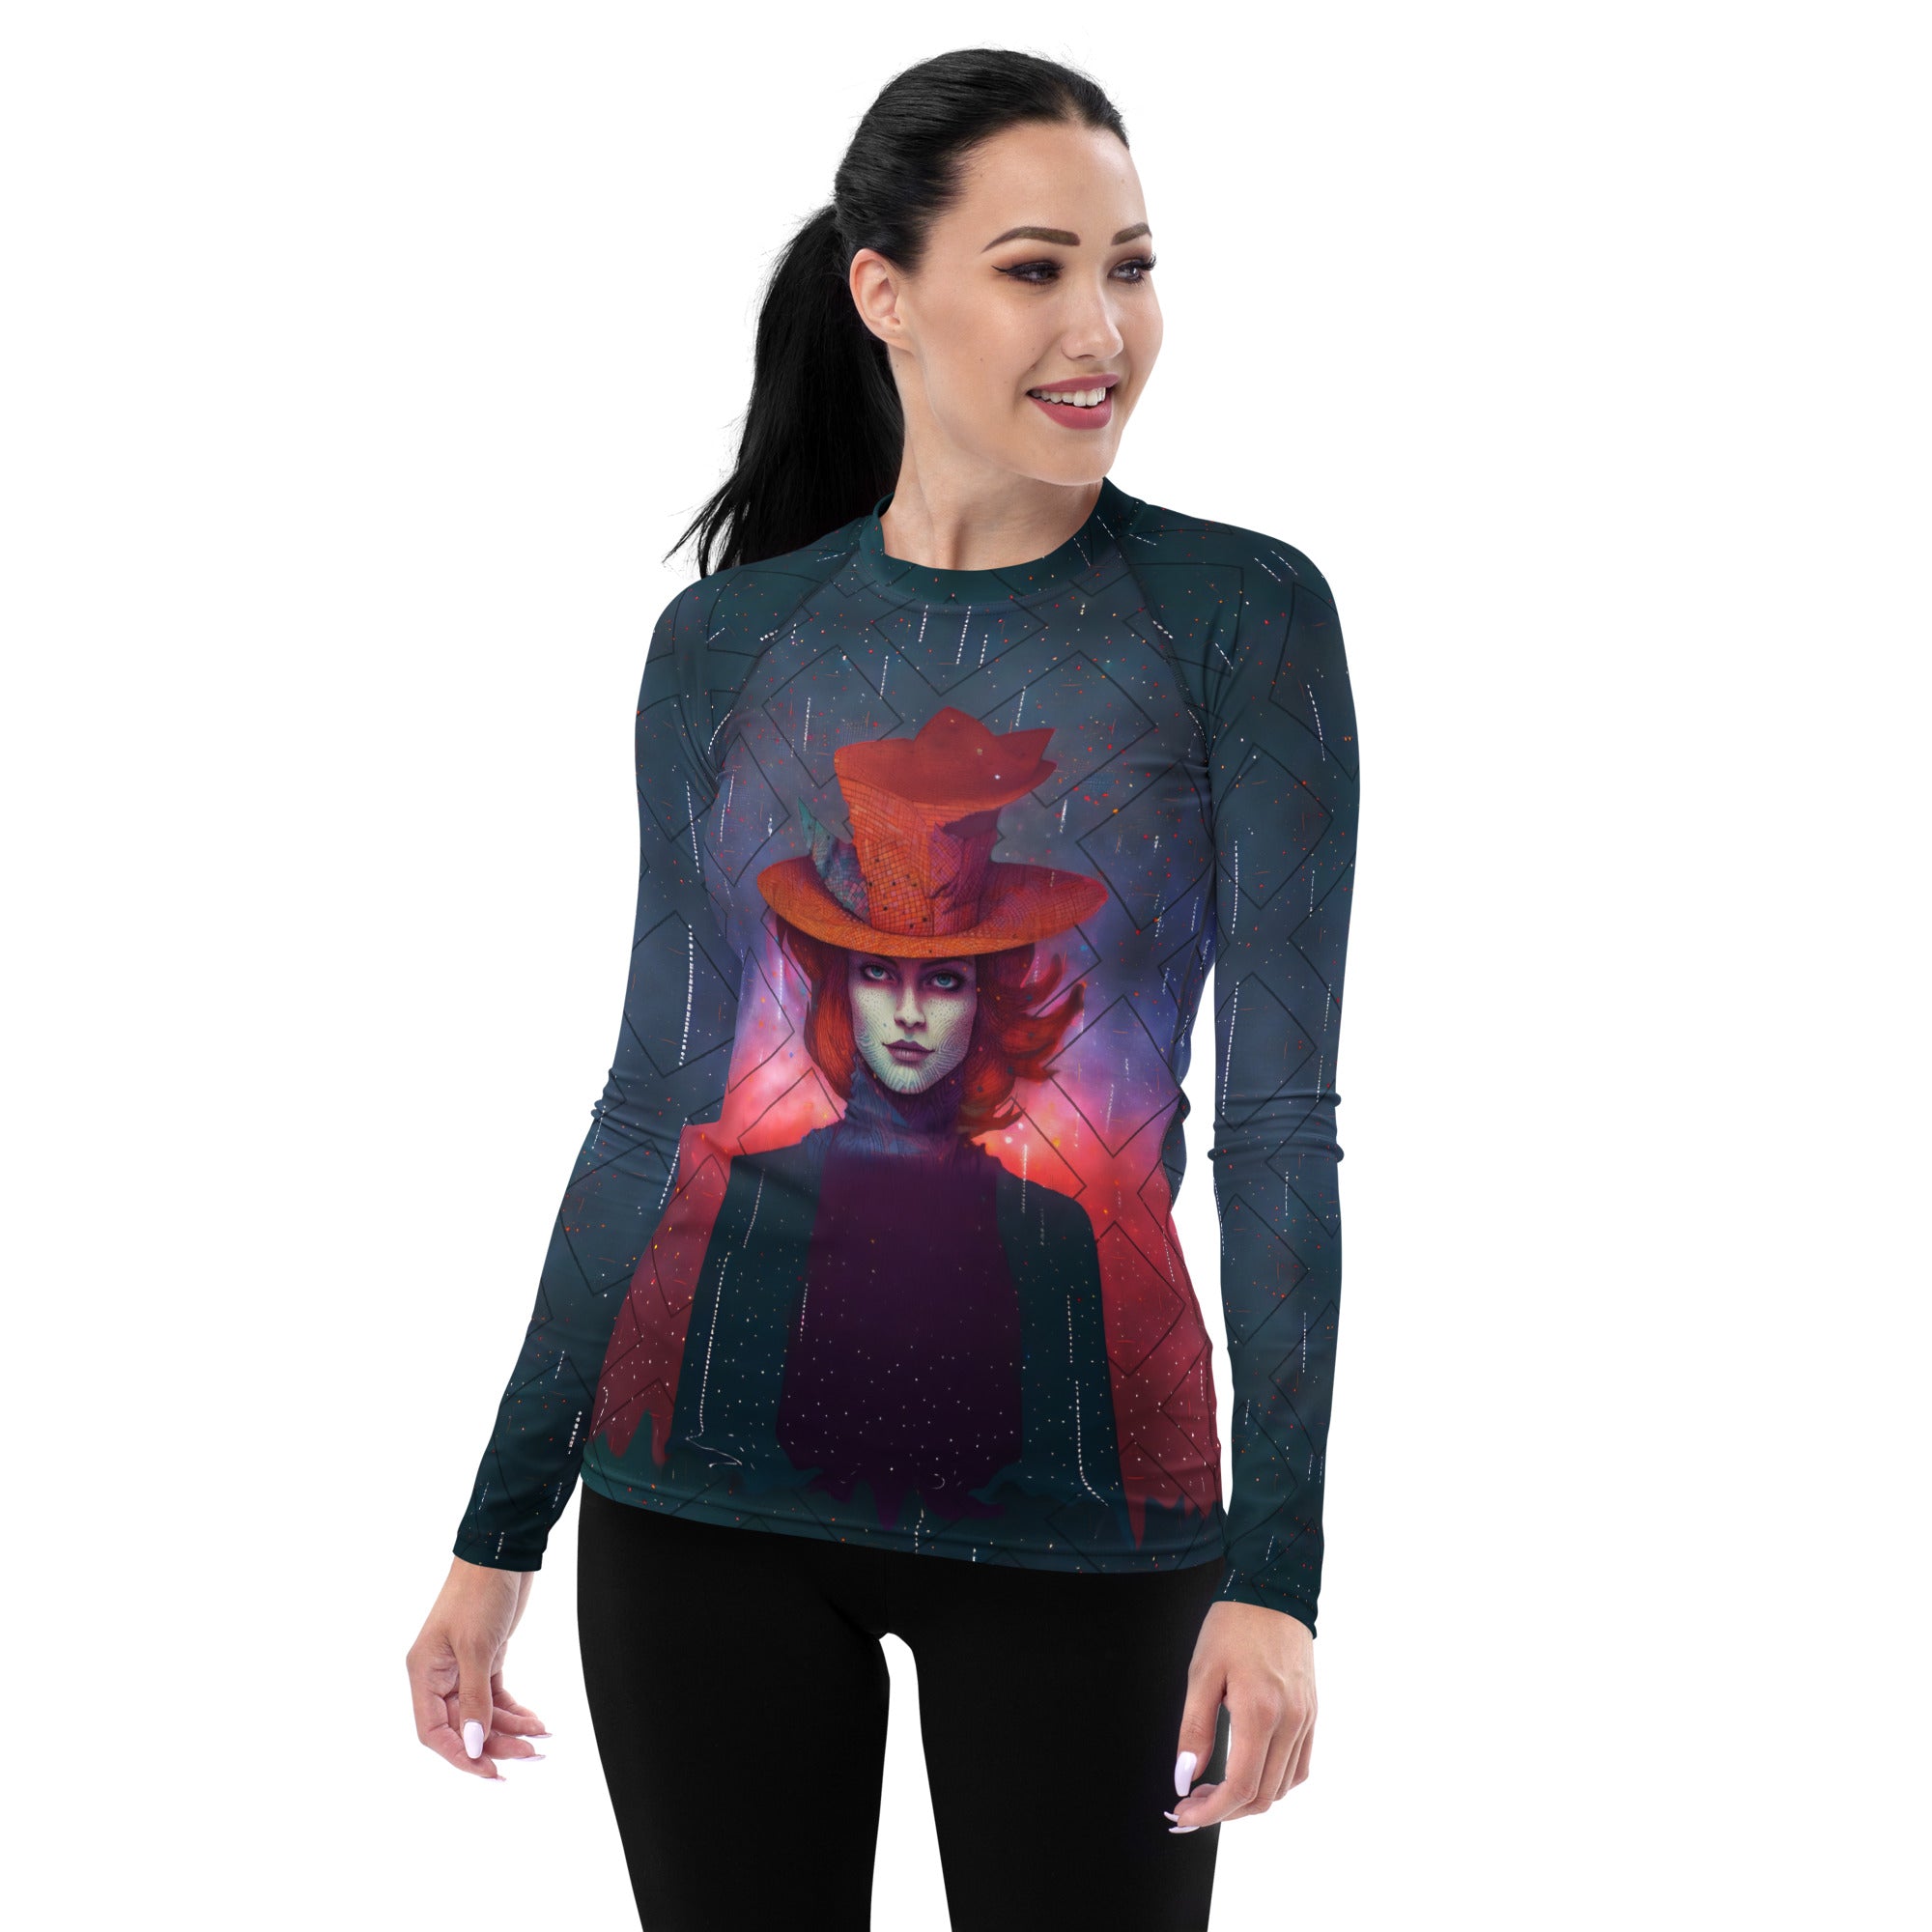 Galactic Explorer Rash Guard for women, ideal for water sports